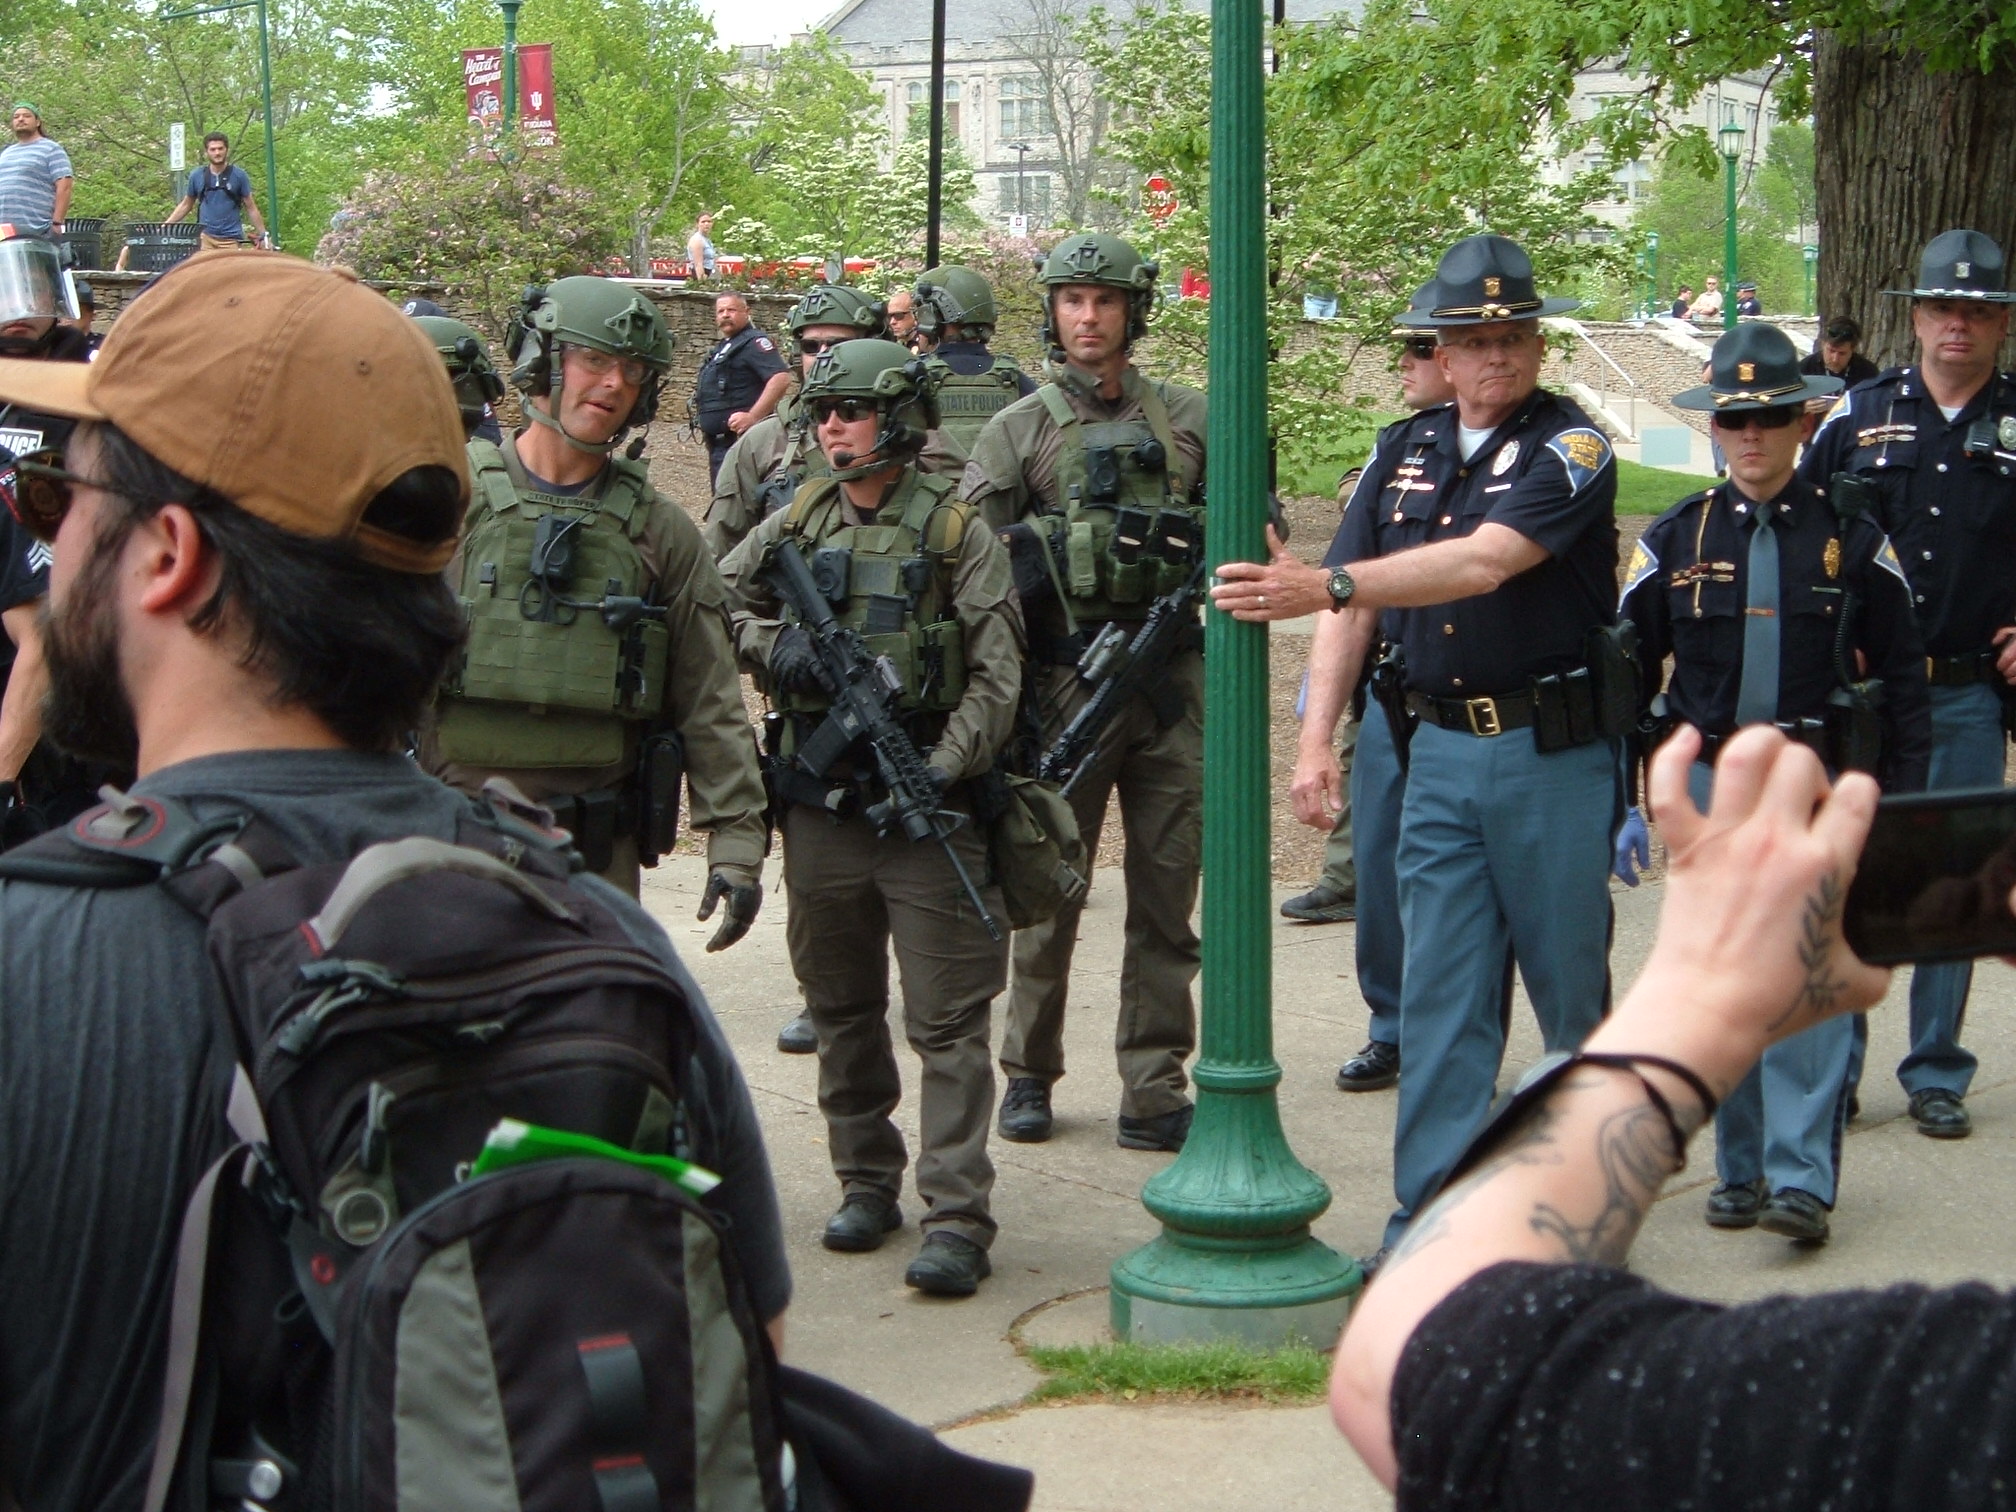 The commanding officer holds a green lamp post that several police nearly tripped over in the retreat. On one side of the frame, the SWAT unit with guns exchanges words. On the other side, Indiana State Police officers in uniform observe the crowd.